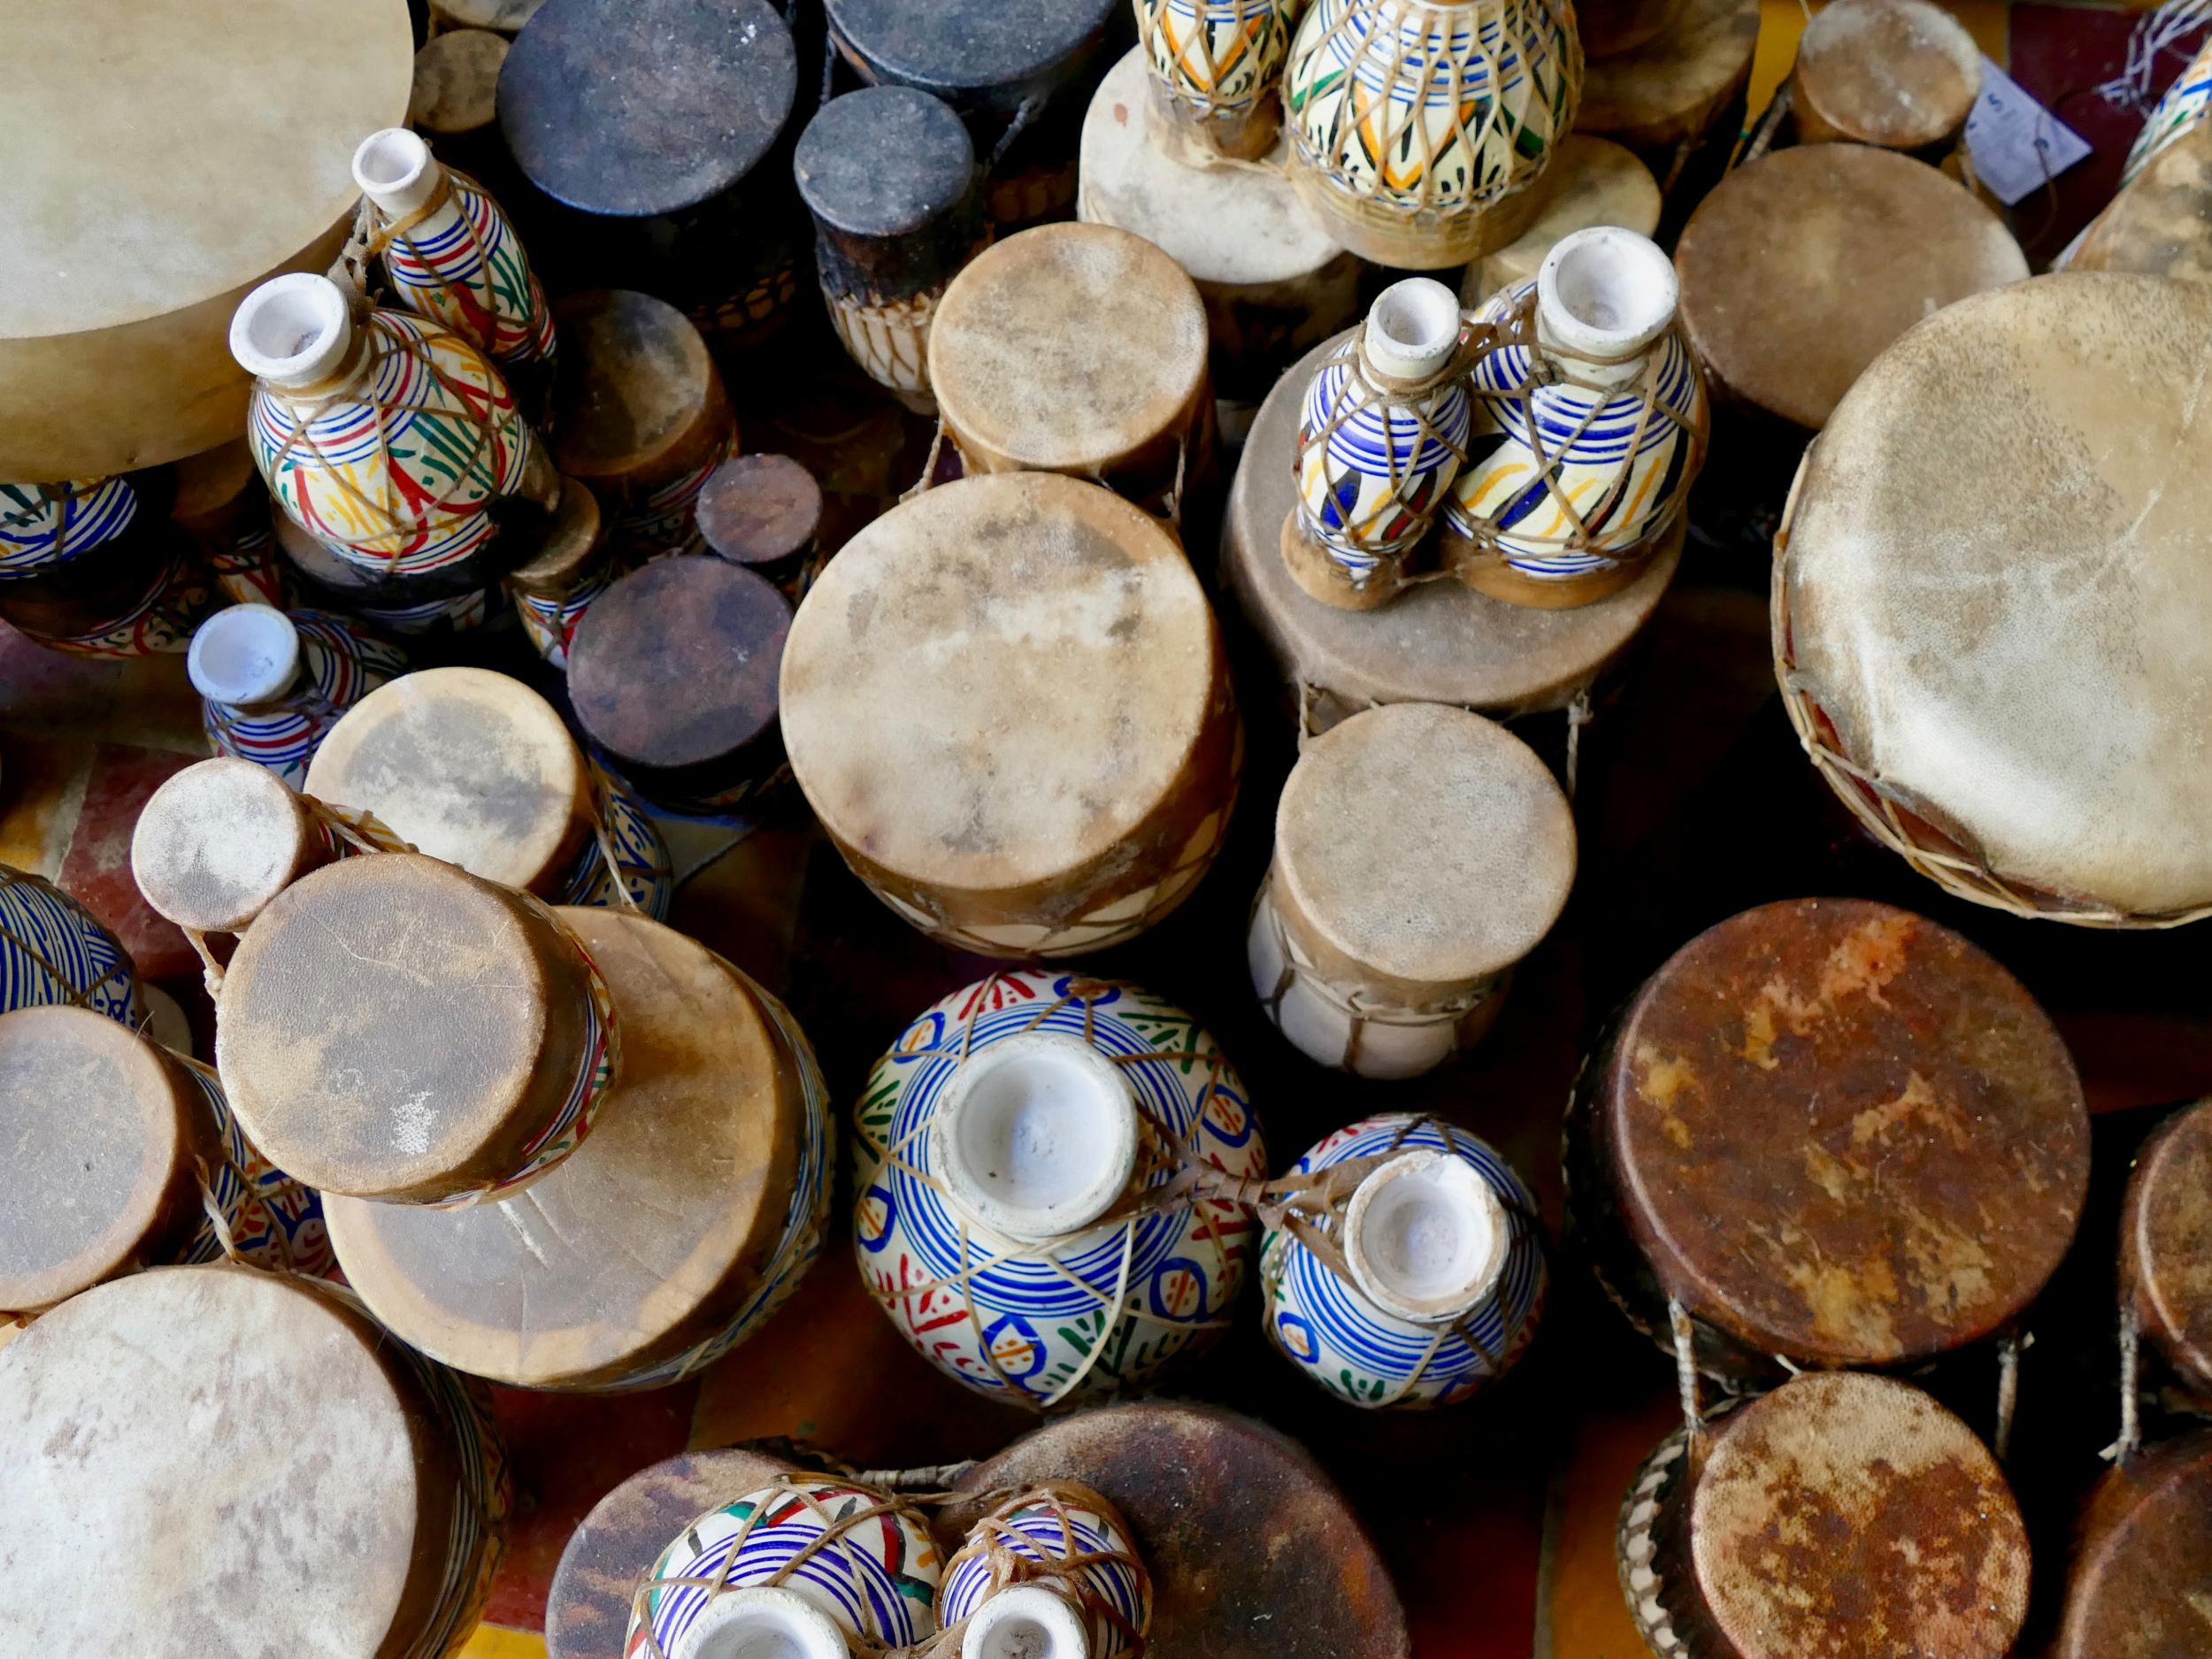 Fes is one the world’s greatest craft hubs, producing items such as drums